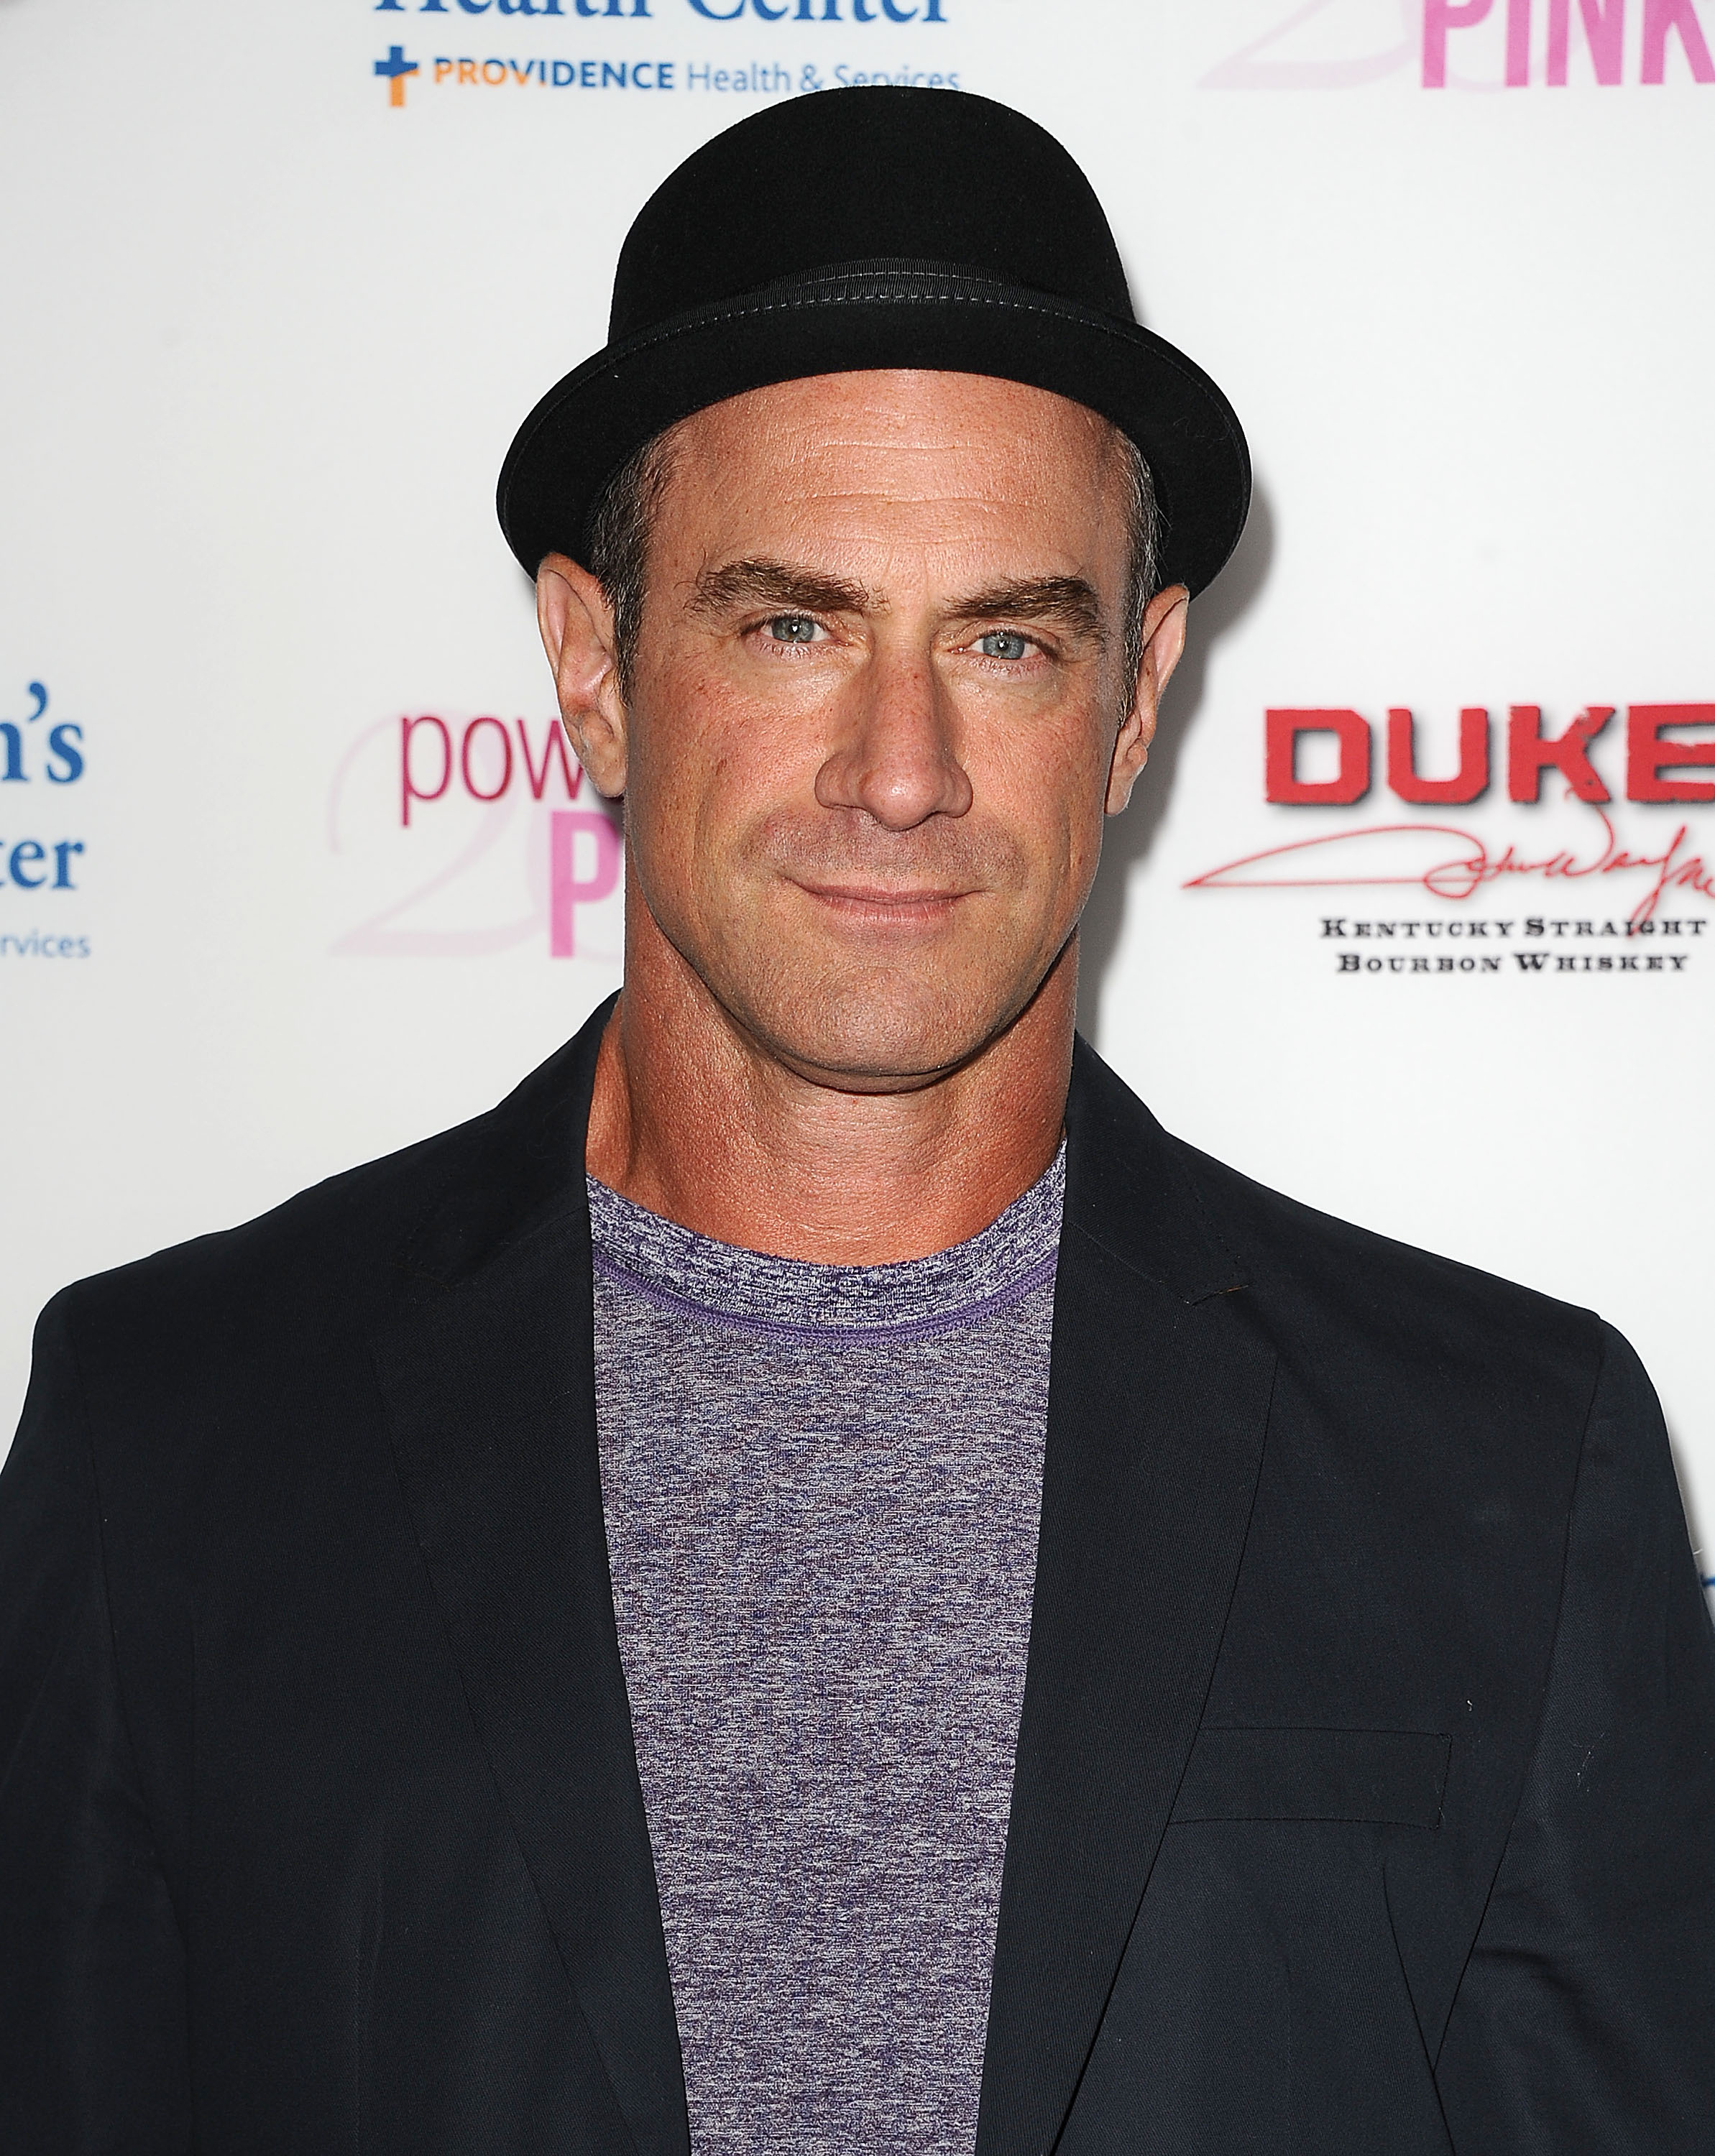 Christopher Meloni attends the 2014 Power of Pink in West Hollywood, California on October 23, 2014.